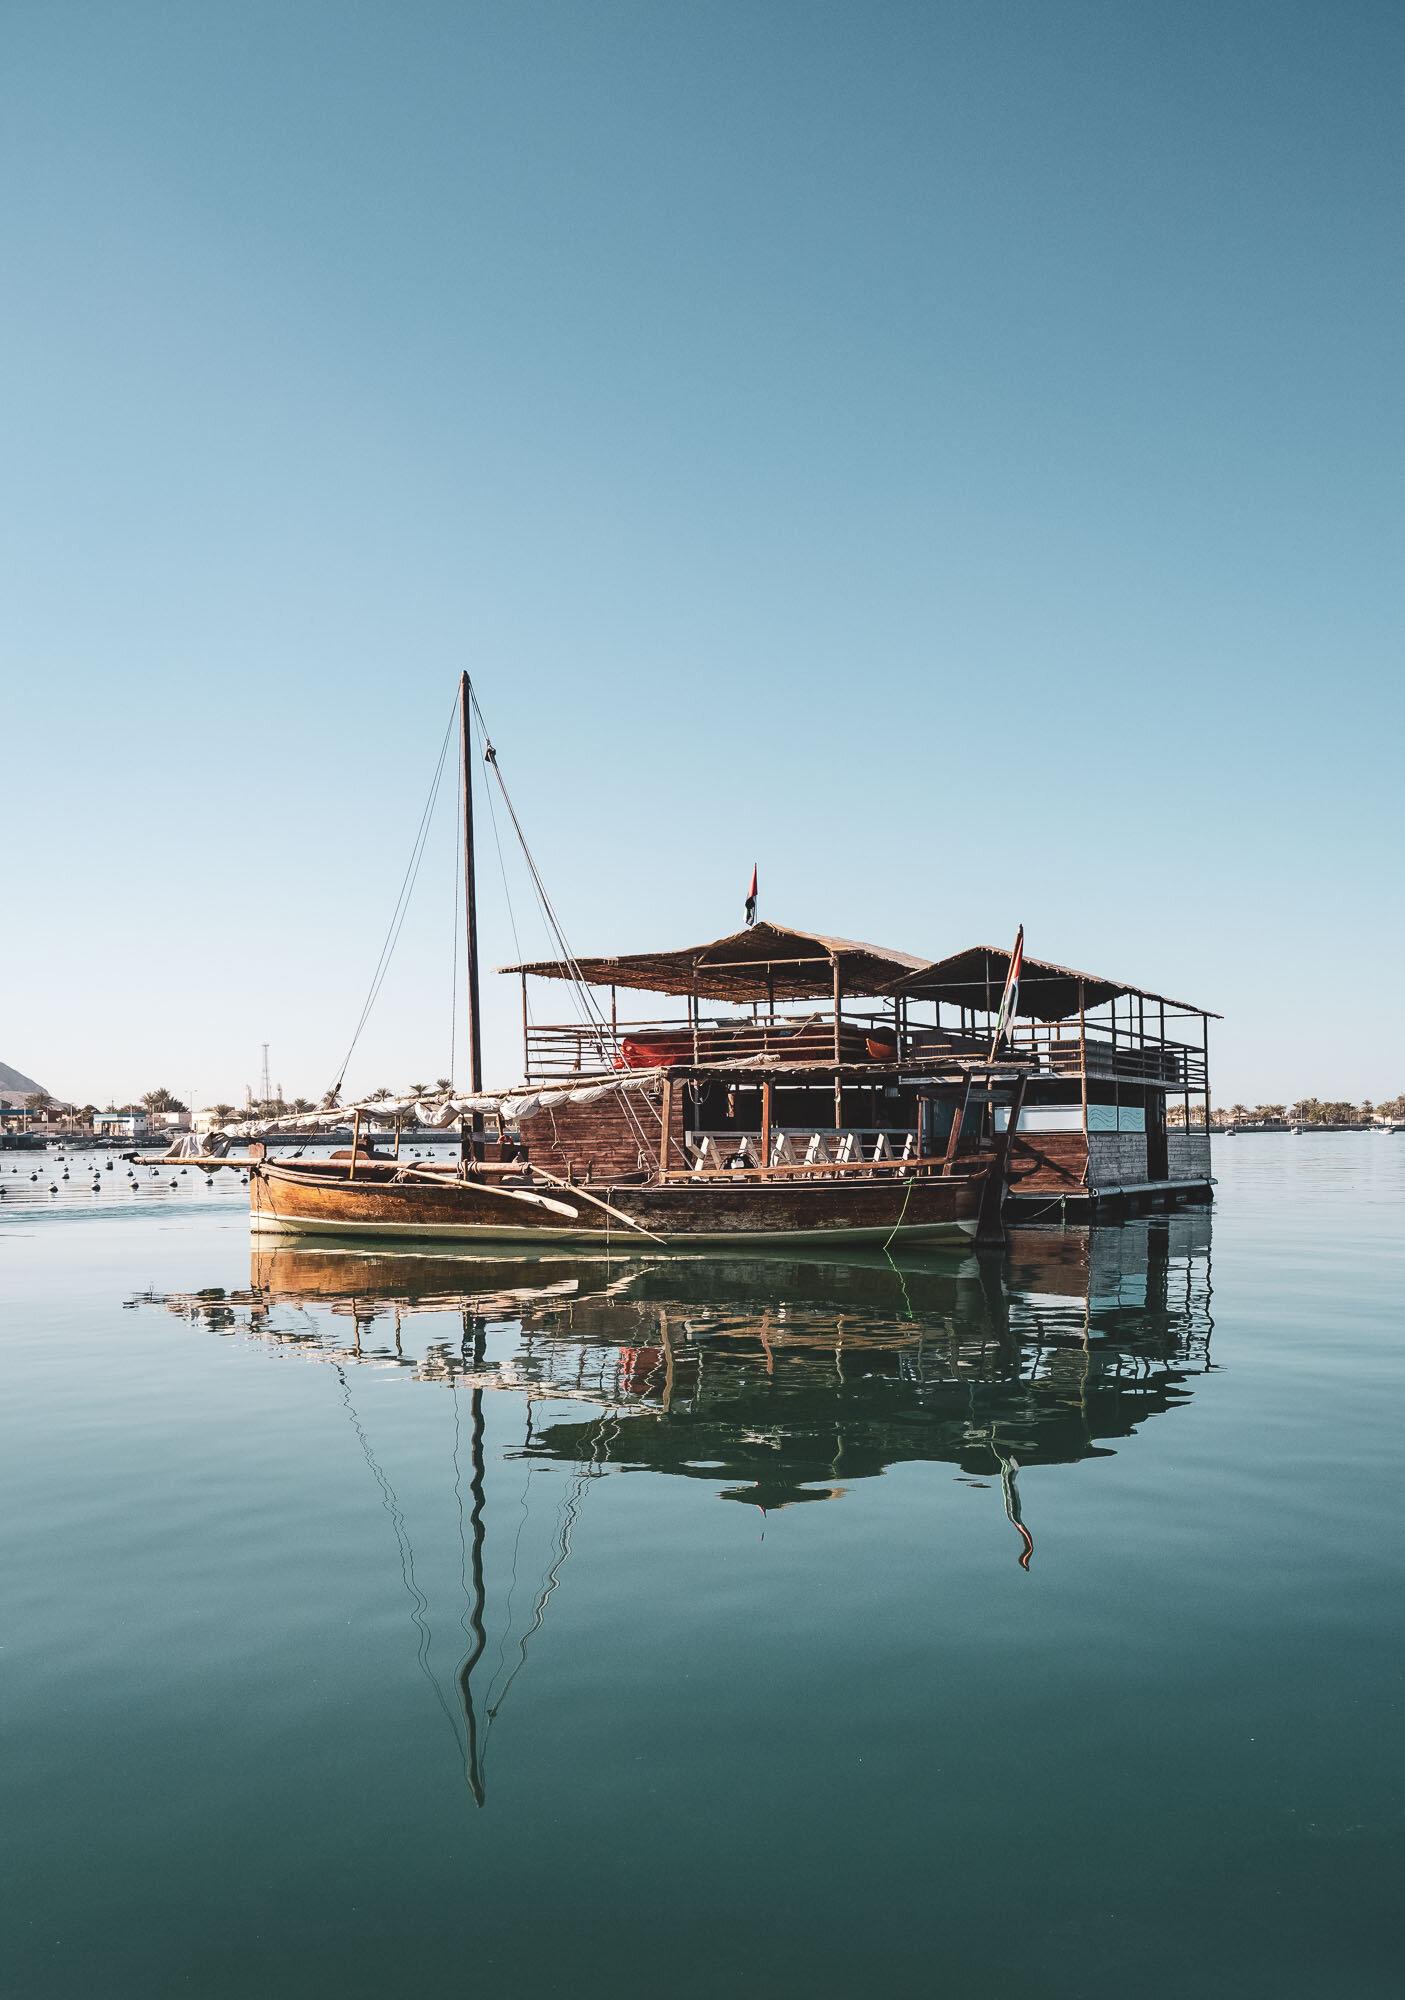 A Day of Discovery at Ras Al Khaimah!